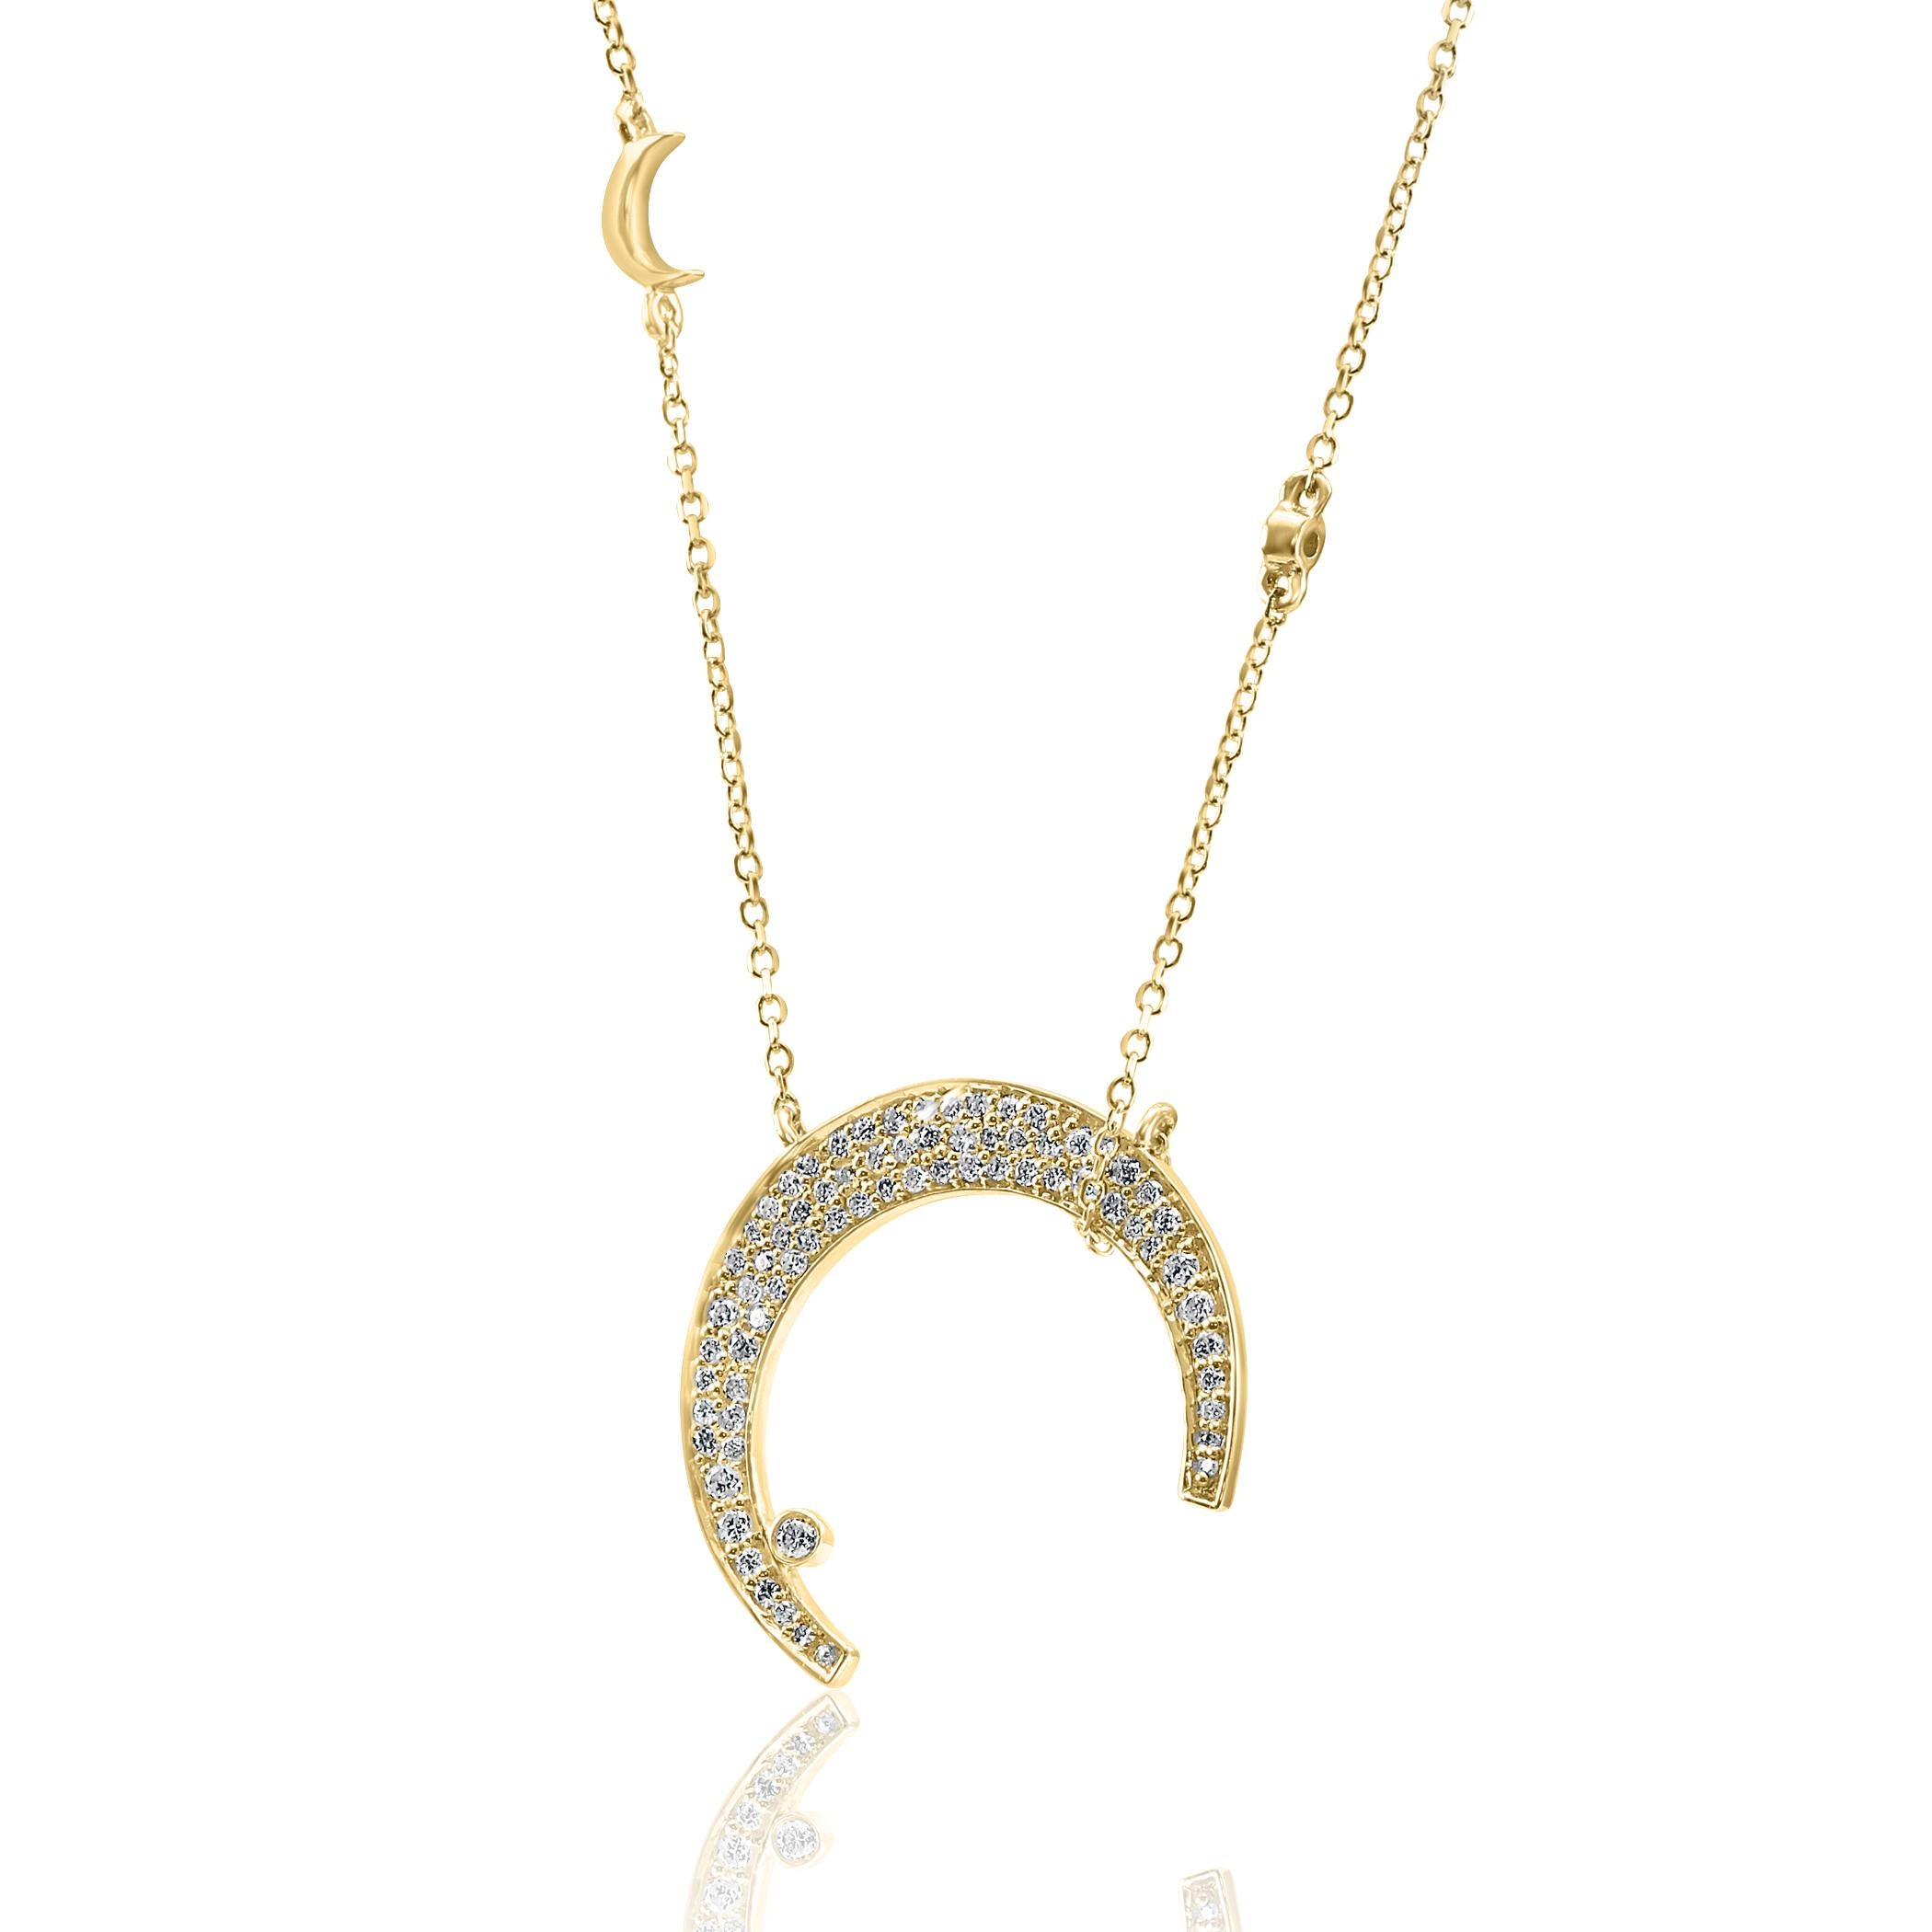 Illuminate your style with our celestial-inspired 14K Yellow Gold Crescent Pendant Necklace, a mesmerizing piece adorned with 74 dazzling diamonds totaling 0.69 carats, these diamonds sparkle like distant stars, adding brilliance to the